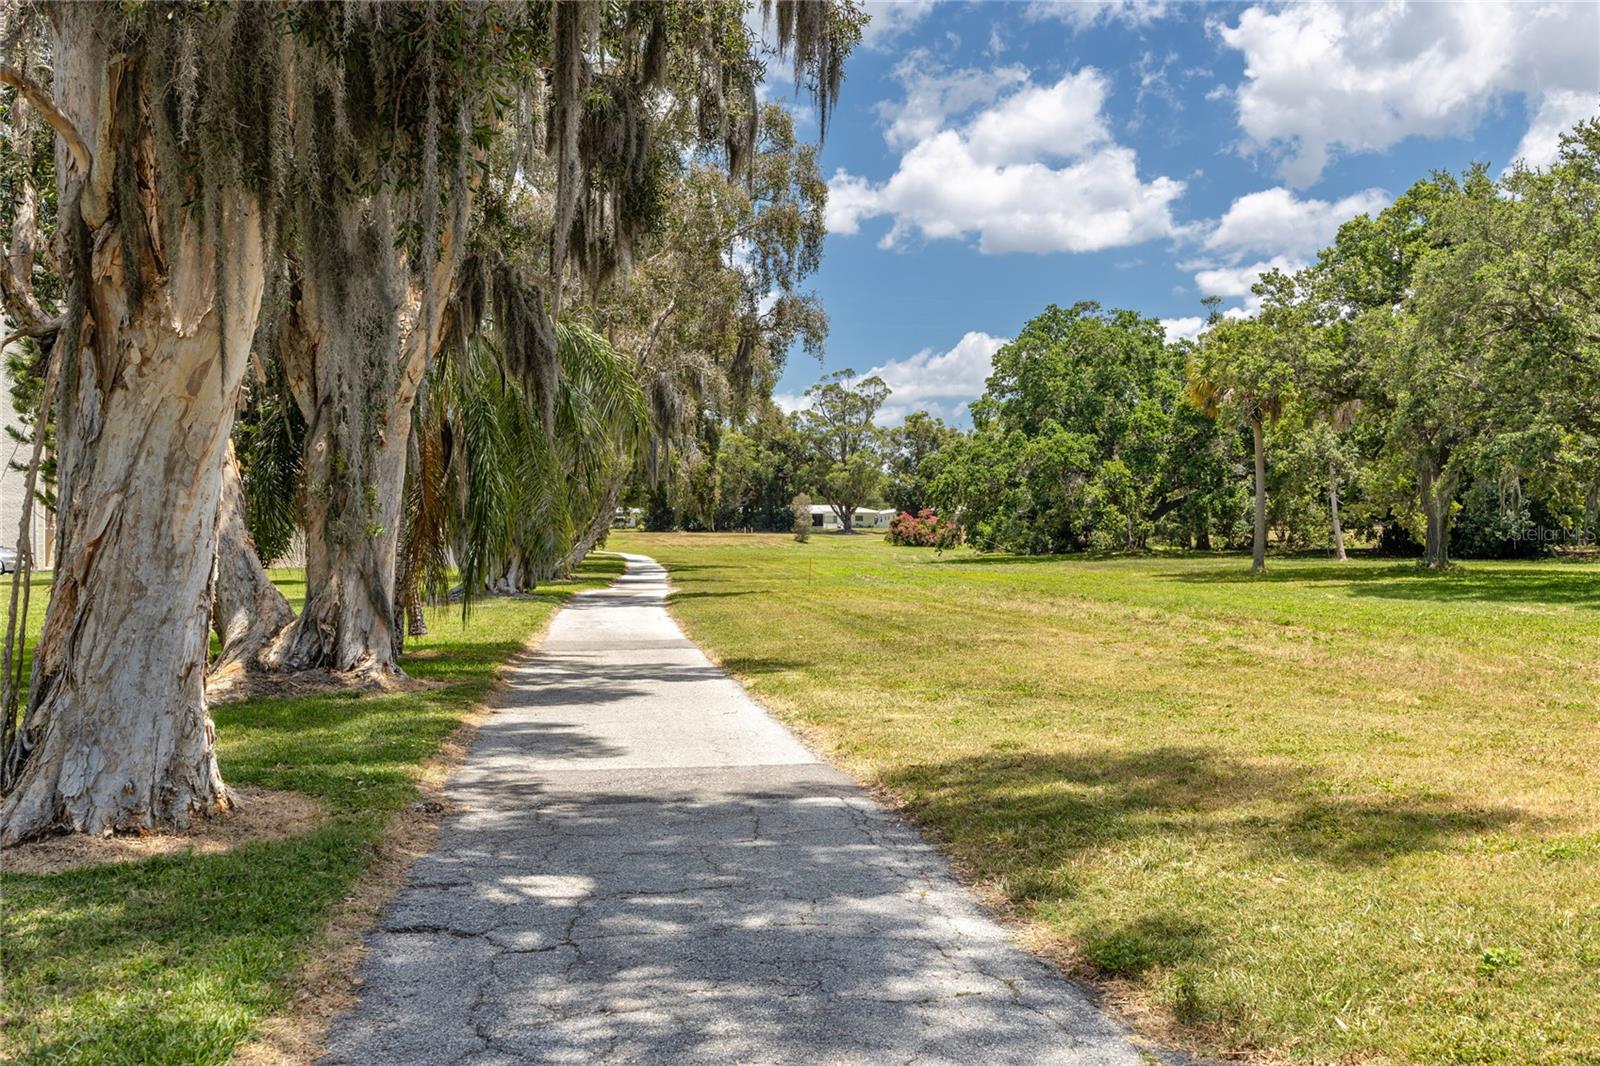 walking path in the Bay Pointe Conservation